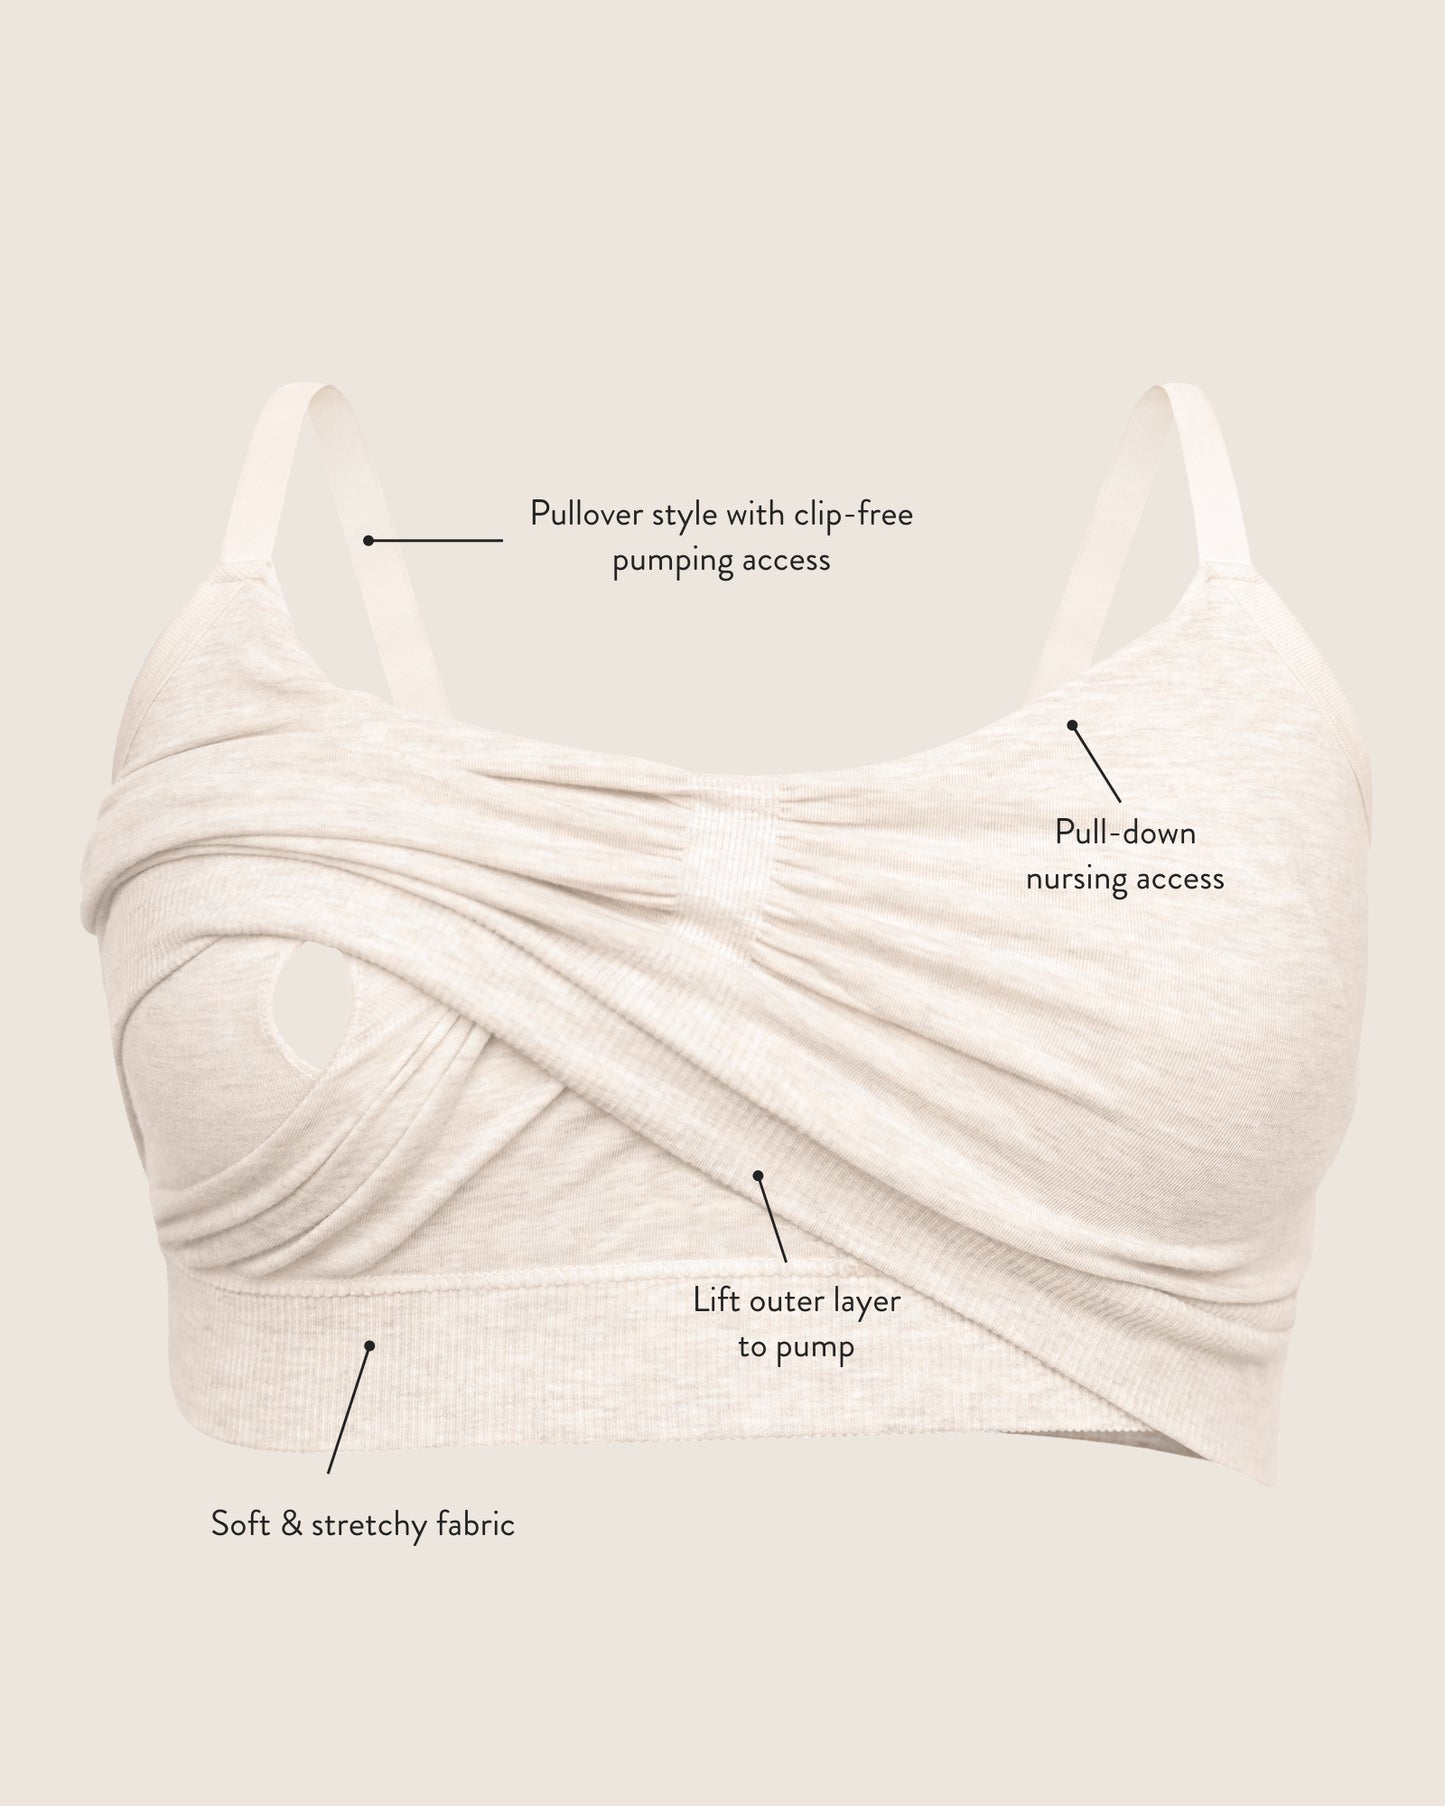 Diagram of the Sublime® Bamboo Hands-Free Pumping Lounge & Sleep Bra